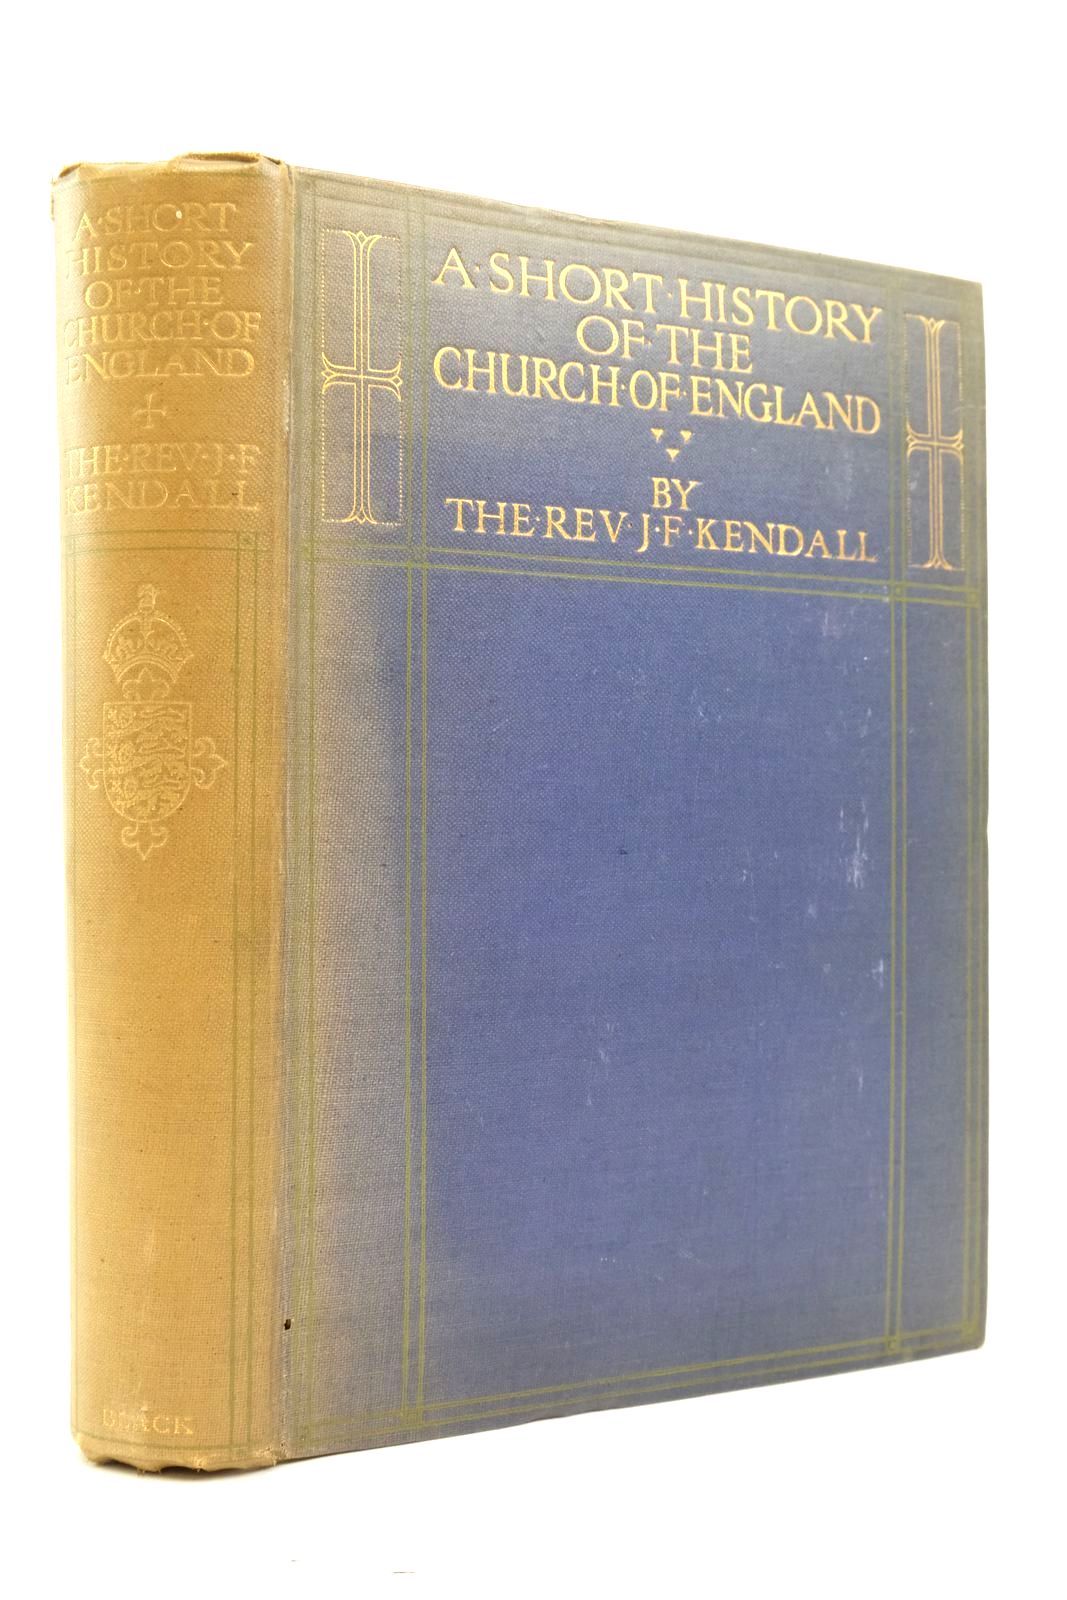 Photo of A SHORT HISTORY OF THE CHURCH OF ENGLAND- Stock Number: 2137461